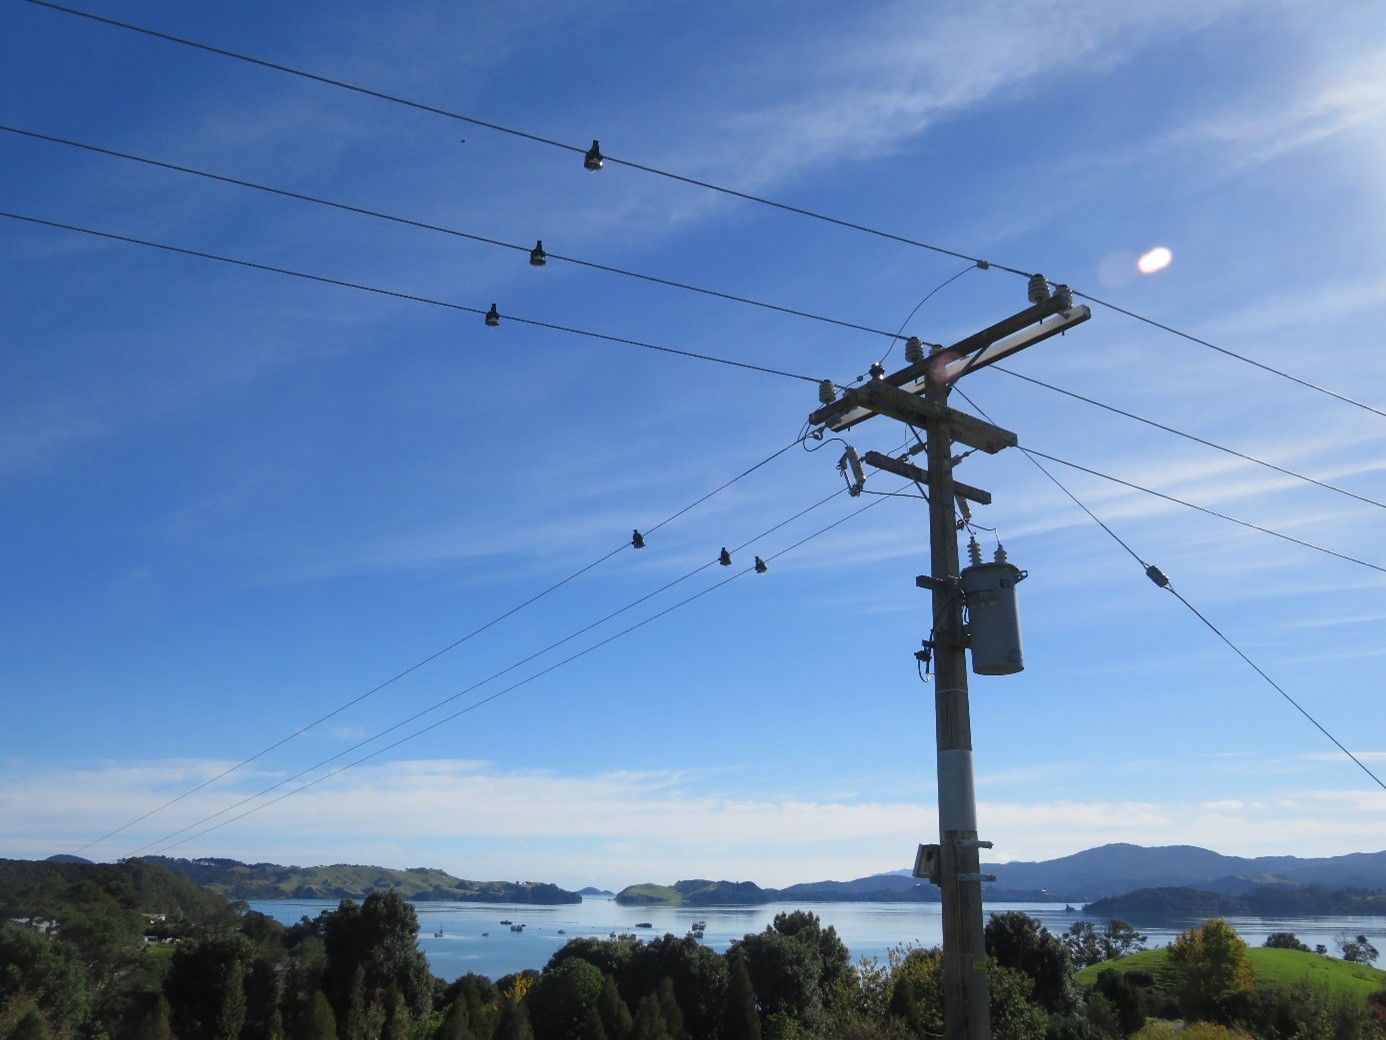 Six Smart Navigator 2.0 Intelligent overhead line monitoring devices attached to and monitor lines in the Coromandel region.